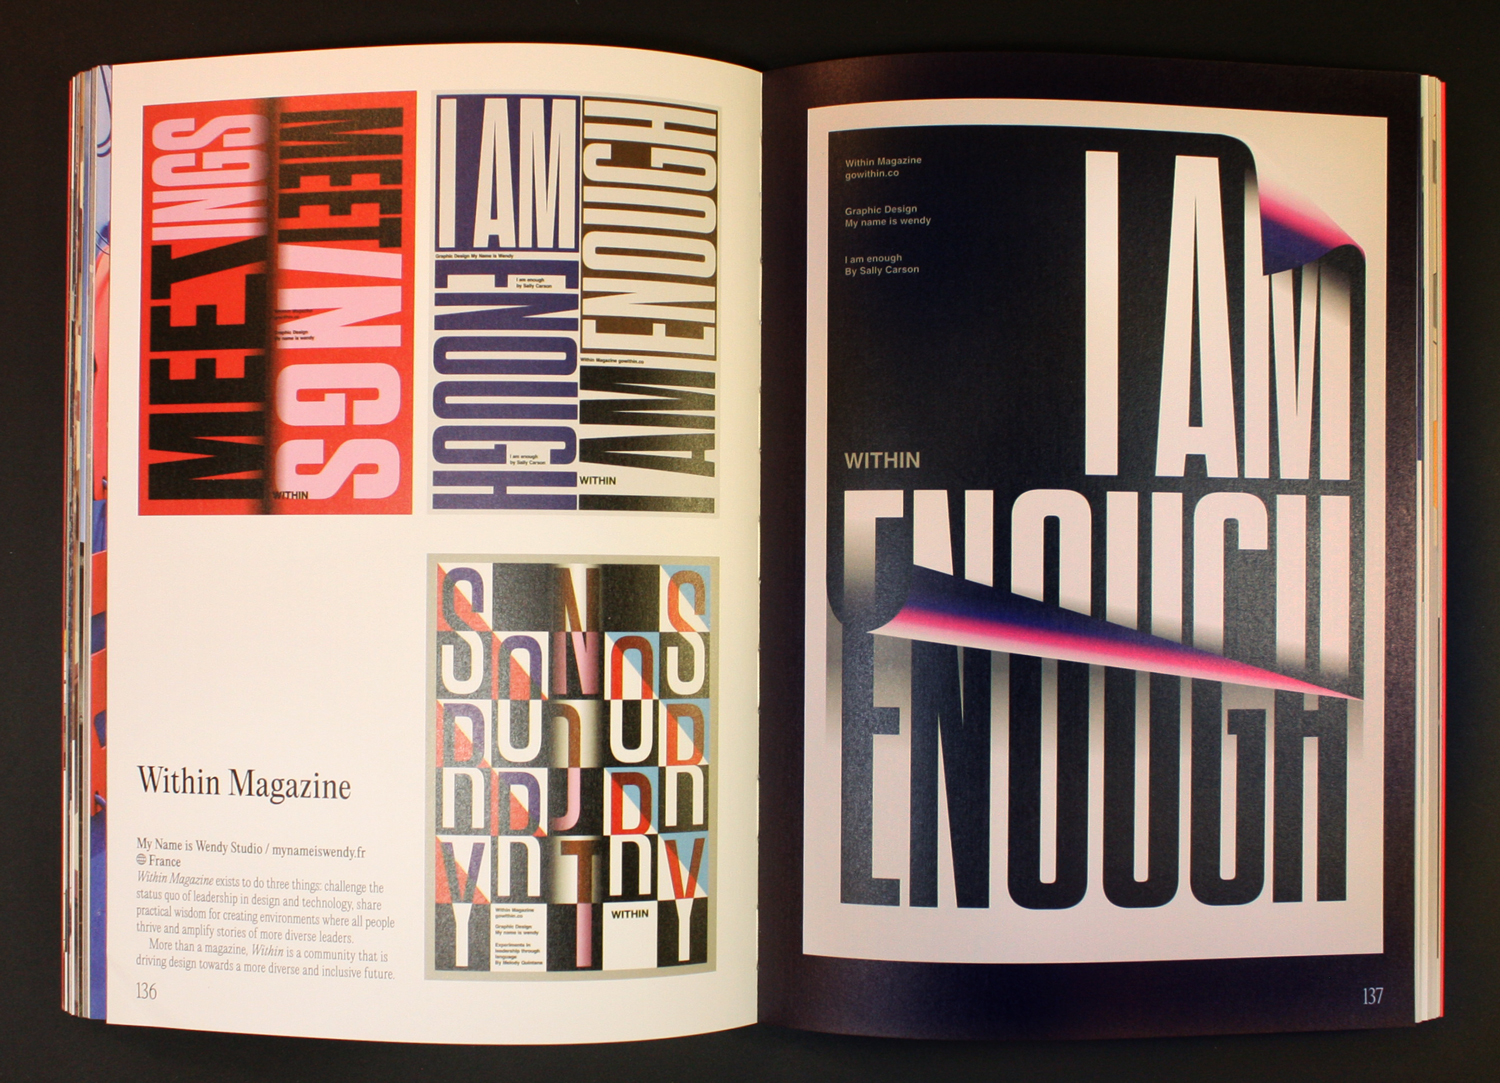 Spread from the ‘Condensed’ chapter of the book, picturing Within Magazine designed by My Name is Wendy Studio.